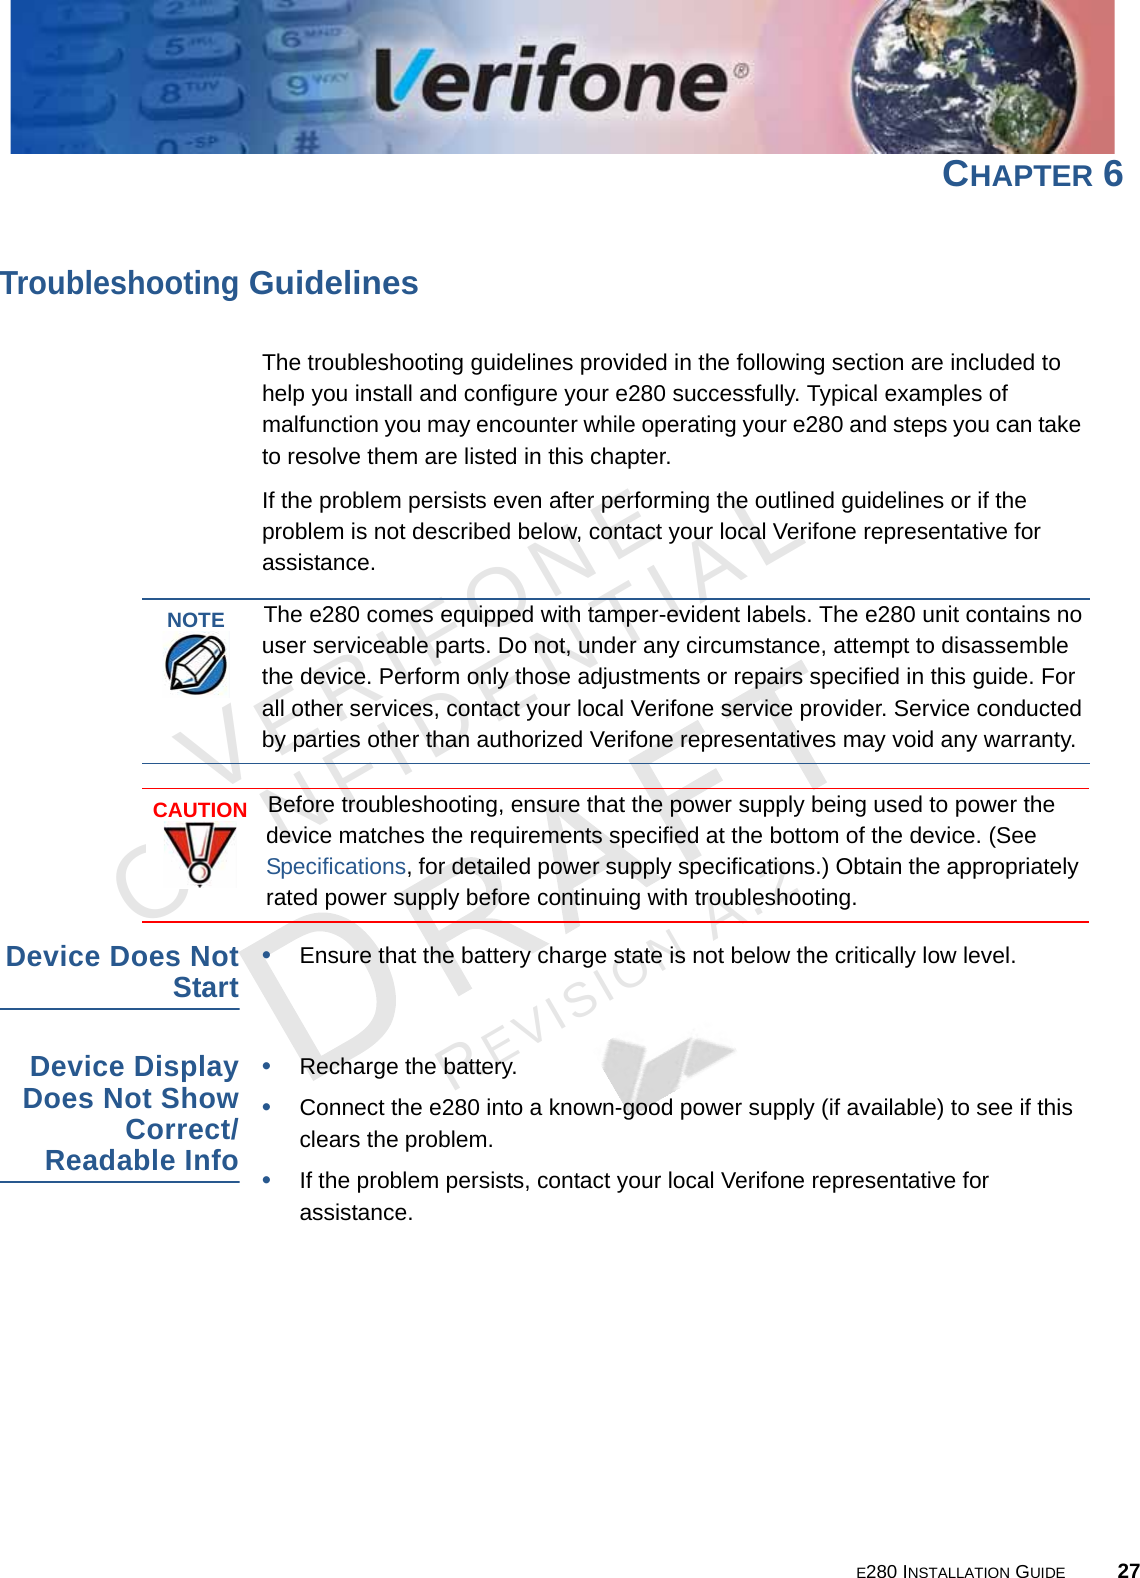 E280 INSTALLATION GUIDE 27VERIFONECONFIDENTIALREVISION A.2 CHAPTER 6Troubleshooting GuidelinesThe troubleshooting guidelines provided in the following section are included to help you install and configure your e280 successfully. Typical examples of malfunction you may encounter while operating your e280 and steps you can take to resolve them are listed in this chapter. If the problem persists even after performing the outlined guidelines or if the problem is not described below, contact your local Verifone representative for assistance. Device Does Not Start•Ensure that the battery charge state is not below the critically low level. Device Display Does Not Show Correct/Readable Info•Recharge the battery.•Connect the e280 into a known-good power supply (if available) to see if this clears the problem.•If the problem persists, contact your local Verifone representative for assistance.NOTEThe e280 comes equipped with tamper-evident labels. The e280 unit contains no user serviceable parts. Do not, under any circumstance, attempt to disassemble the device. Perform only those adjustments or repairs specified in this guide. For all other services, contact your local Verifone service provider. Service conducted by parties other than authorized Verifone representatives may void any warranty.CAUTIONBefore troubleshooting, ensure that the power supply being used to power the device matches the requirements specified at the bottom of the device. (See Specifications, for detailed power supply specifications.) Obtain the appropriately rated power supply before continuing with troubleshooting.